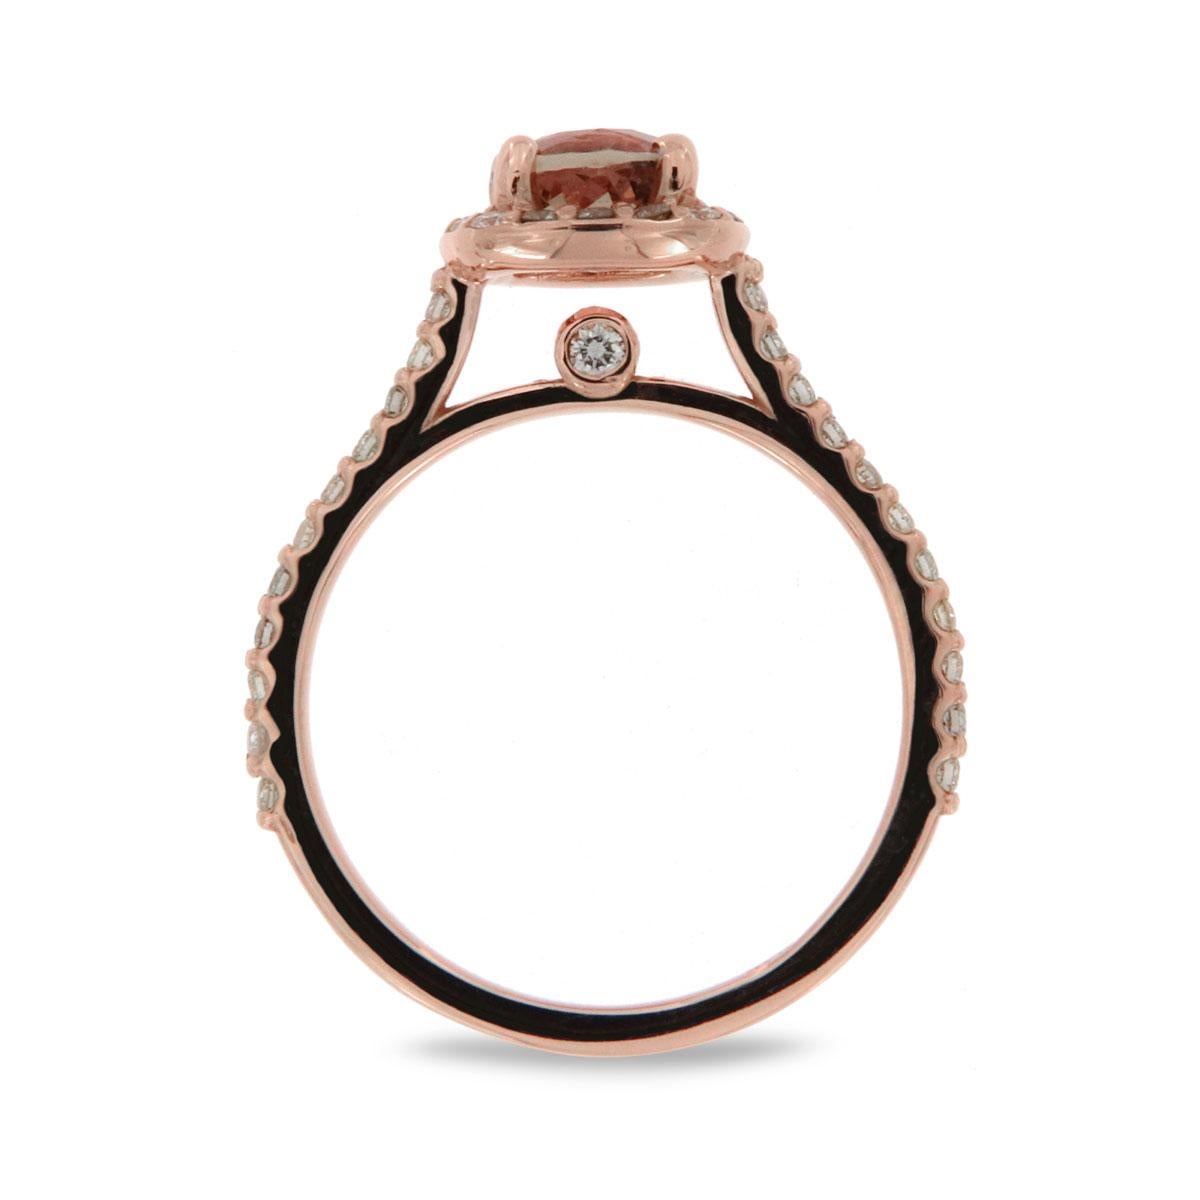 A halo of diamonds surrounds the center 1.21-carat Natural Sapphire in this stunning 14k rose gold ring

Product details: 

Center Gemstone Type: SAPPHIRE
Center Gemstone Carat Weight: 1.21
Center Gemstone Measurements: 5.70 X 6.01 X 3.99
Center